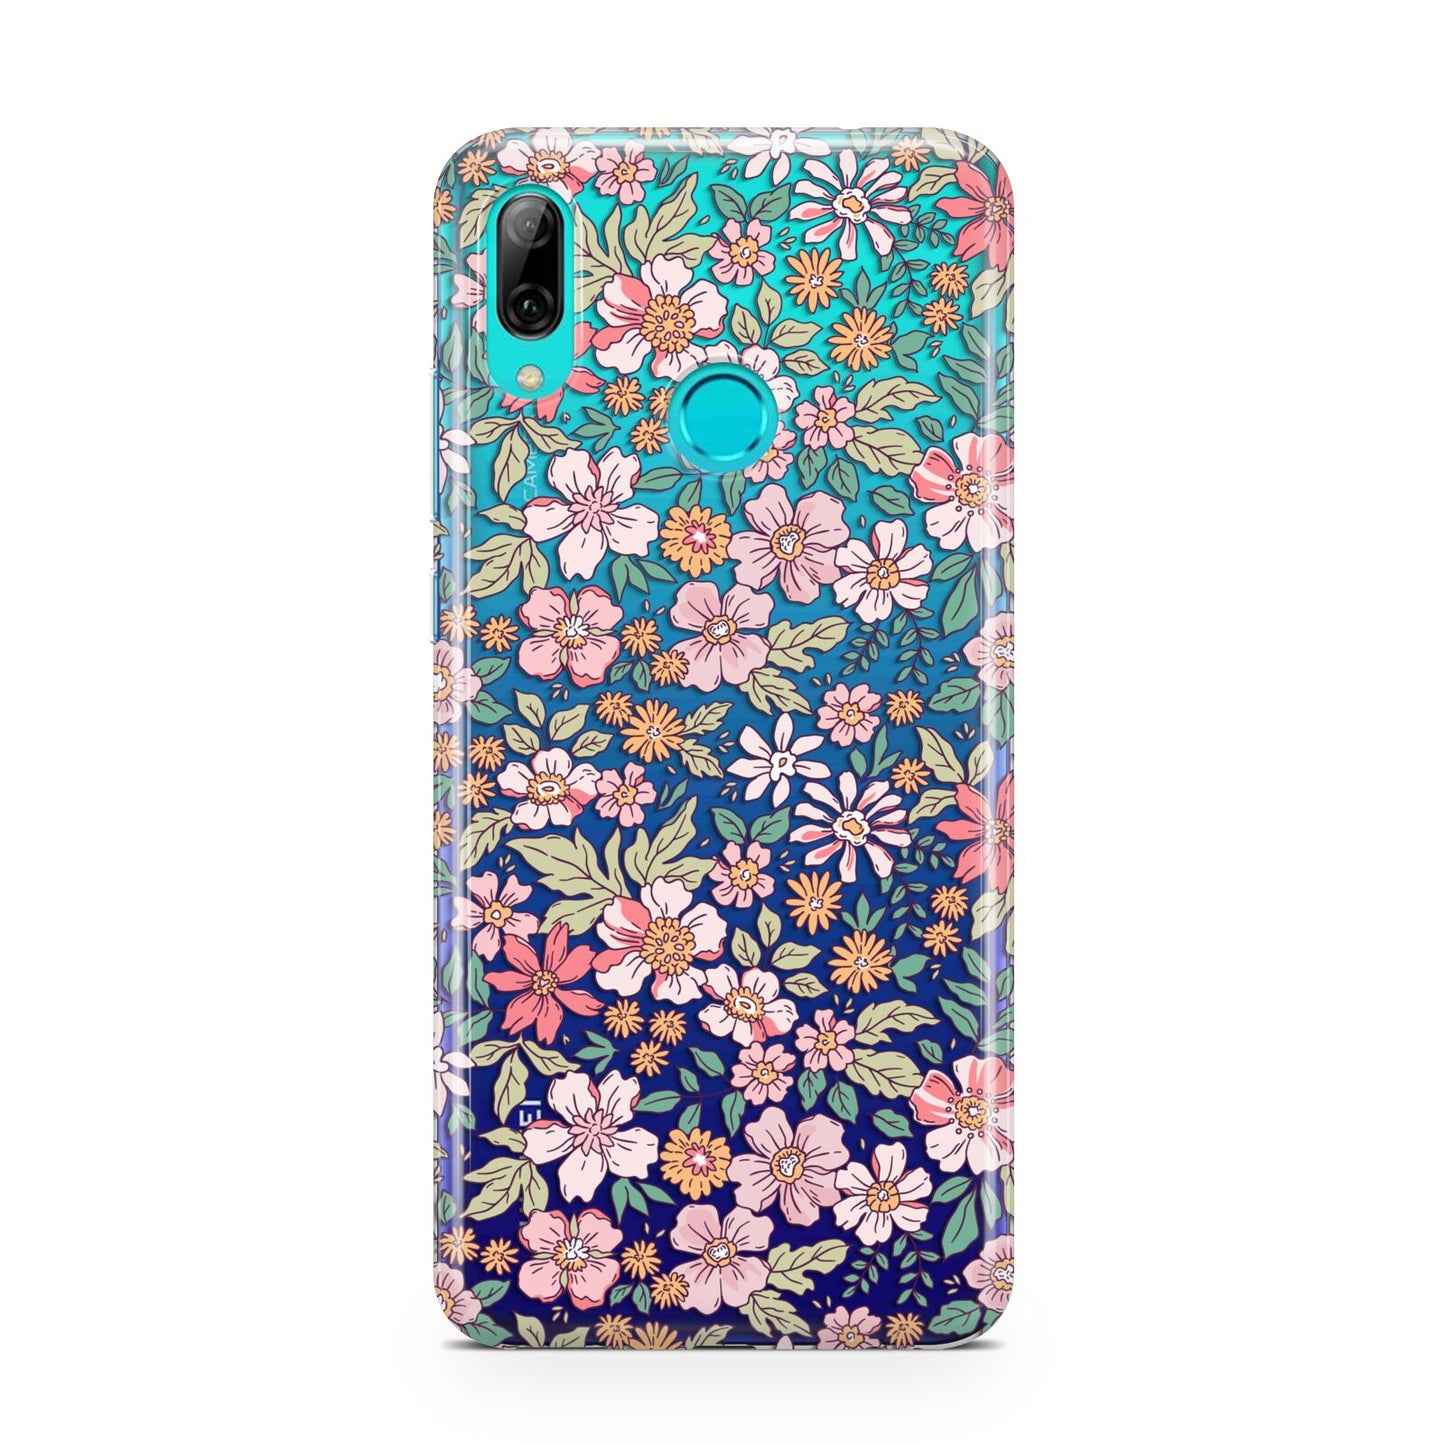 Small Floral Pattern Huawei P Smart 2019 Case